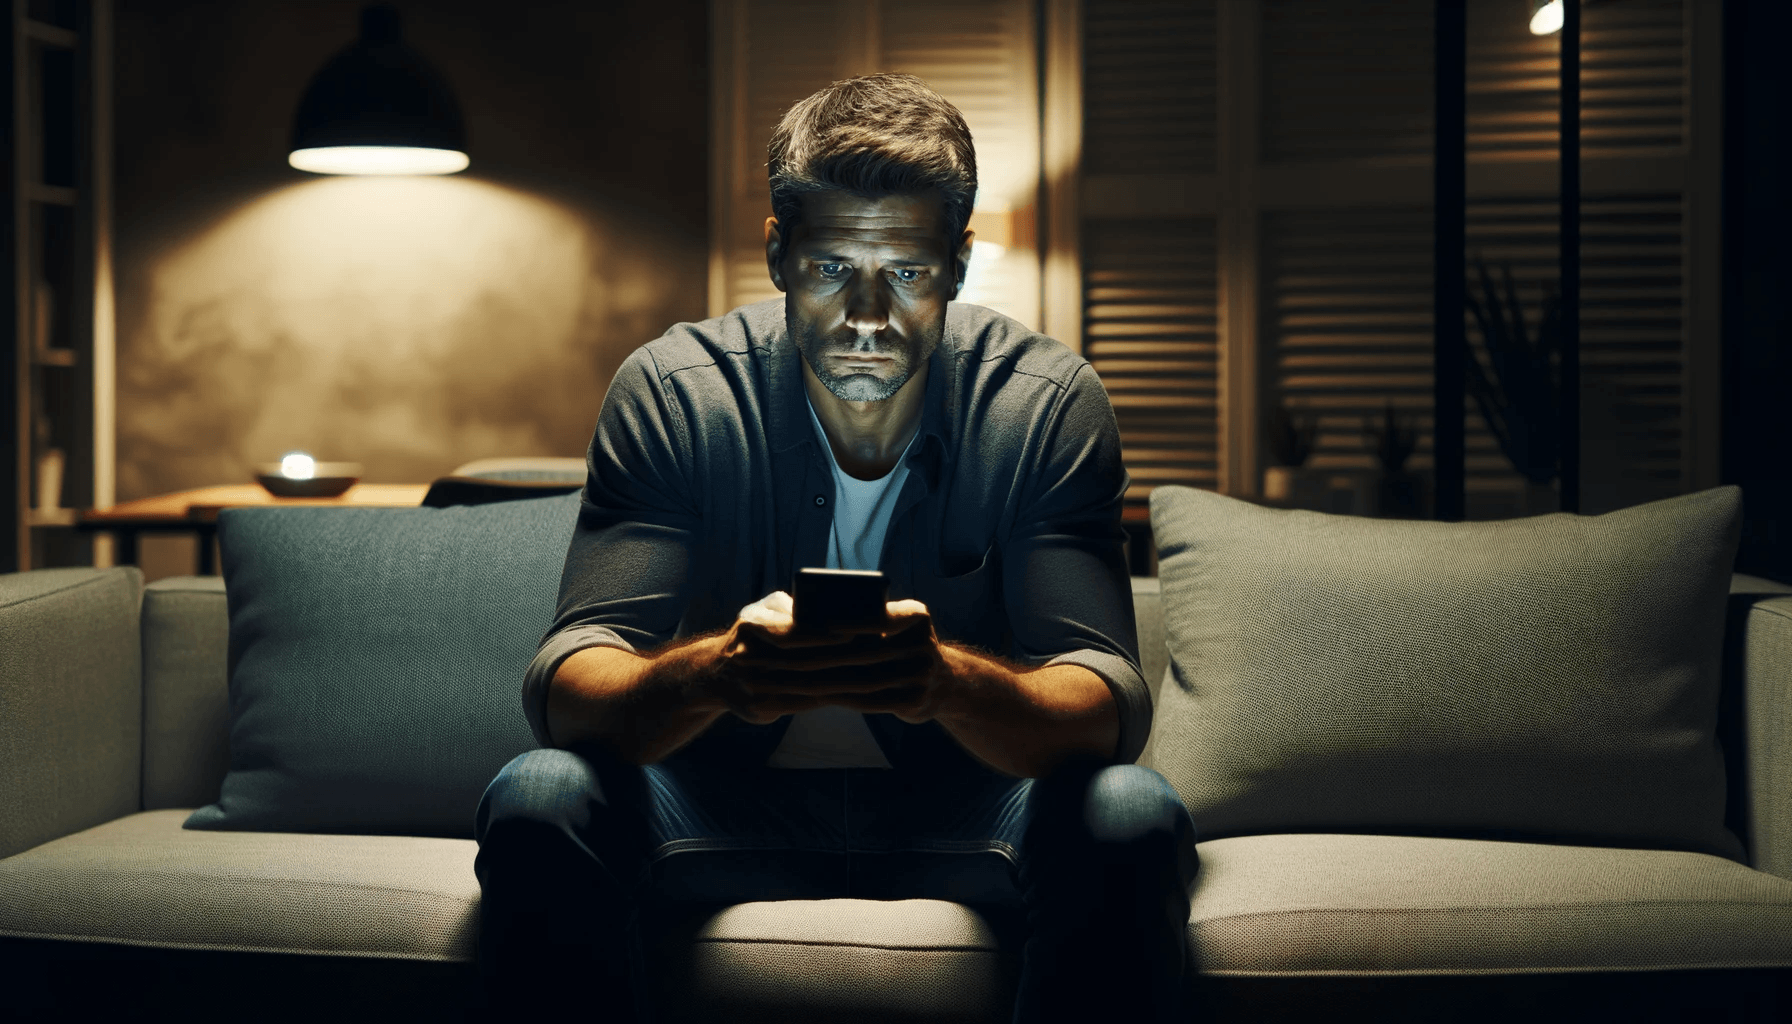 In a modern living room illuminated by soft ambient lighting a Caucasian man in his early 30s sits alone on a comfortable couch. The room has neutral